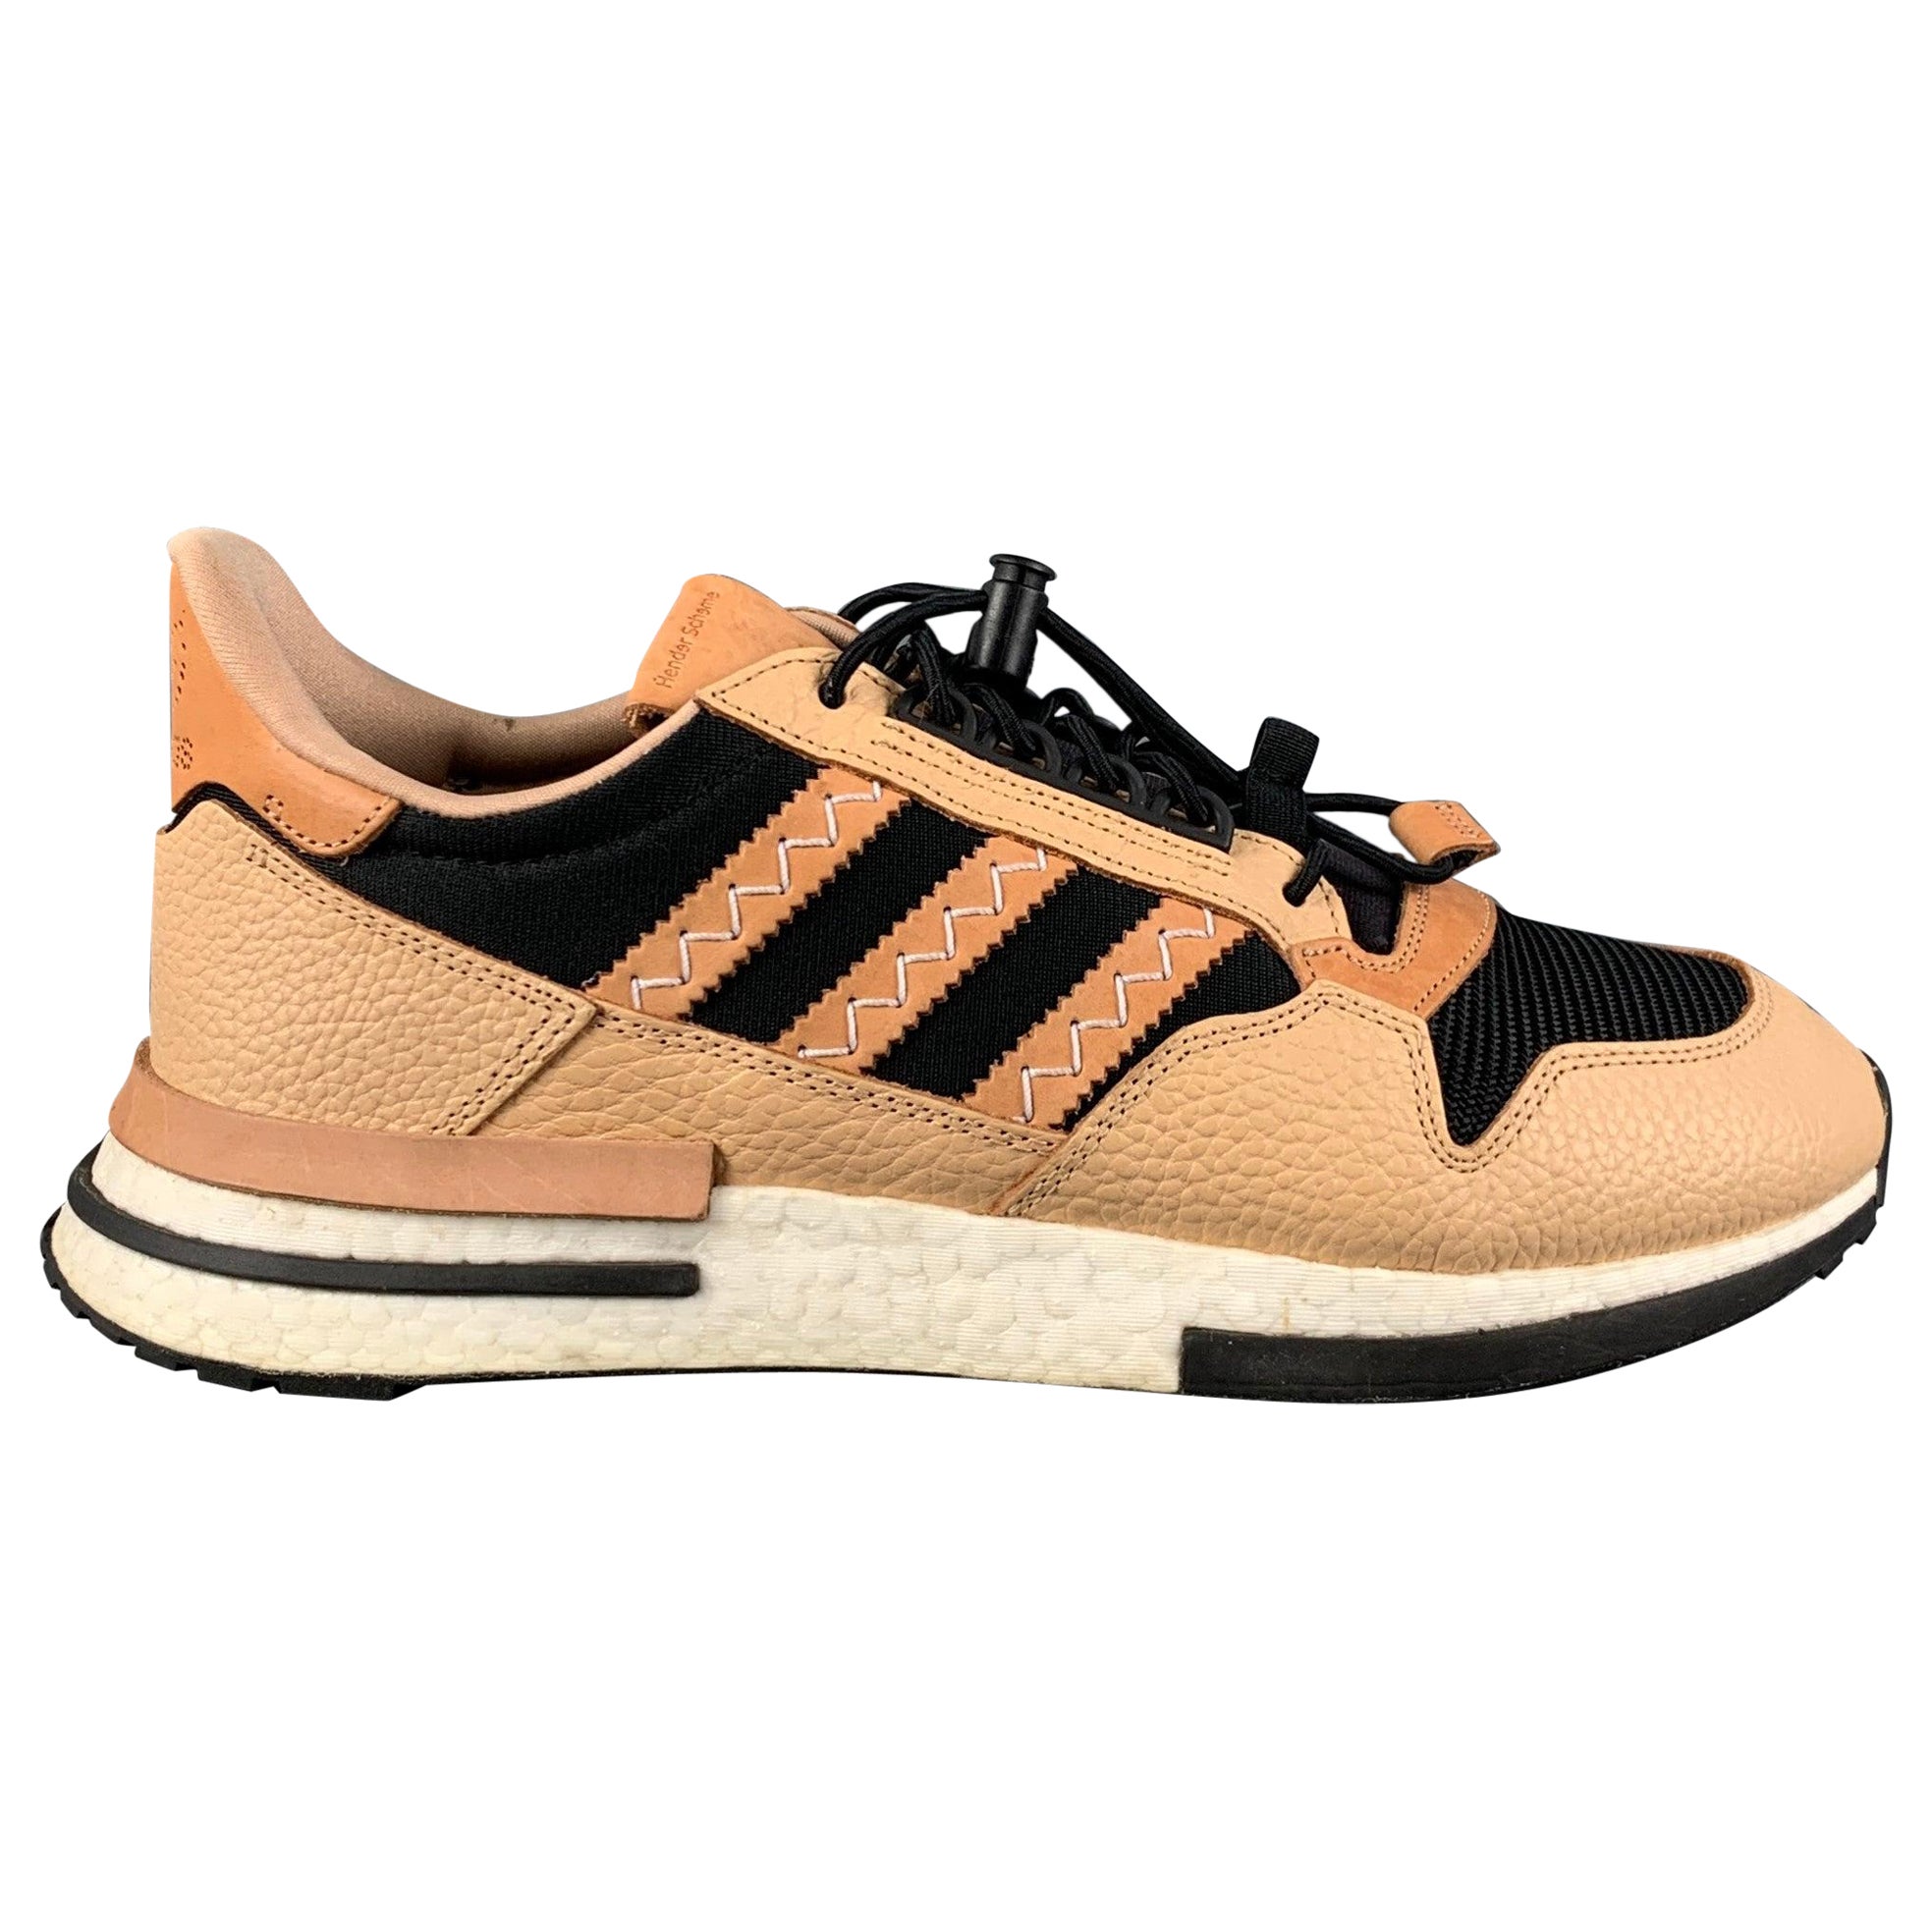 ADIDAS x HENDER SCHEME Size 10.5 Tan Black Leather Lace Up Sneakers For Sale